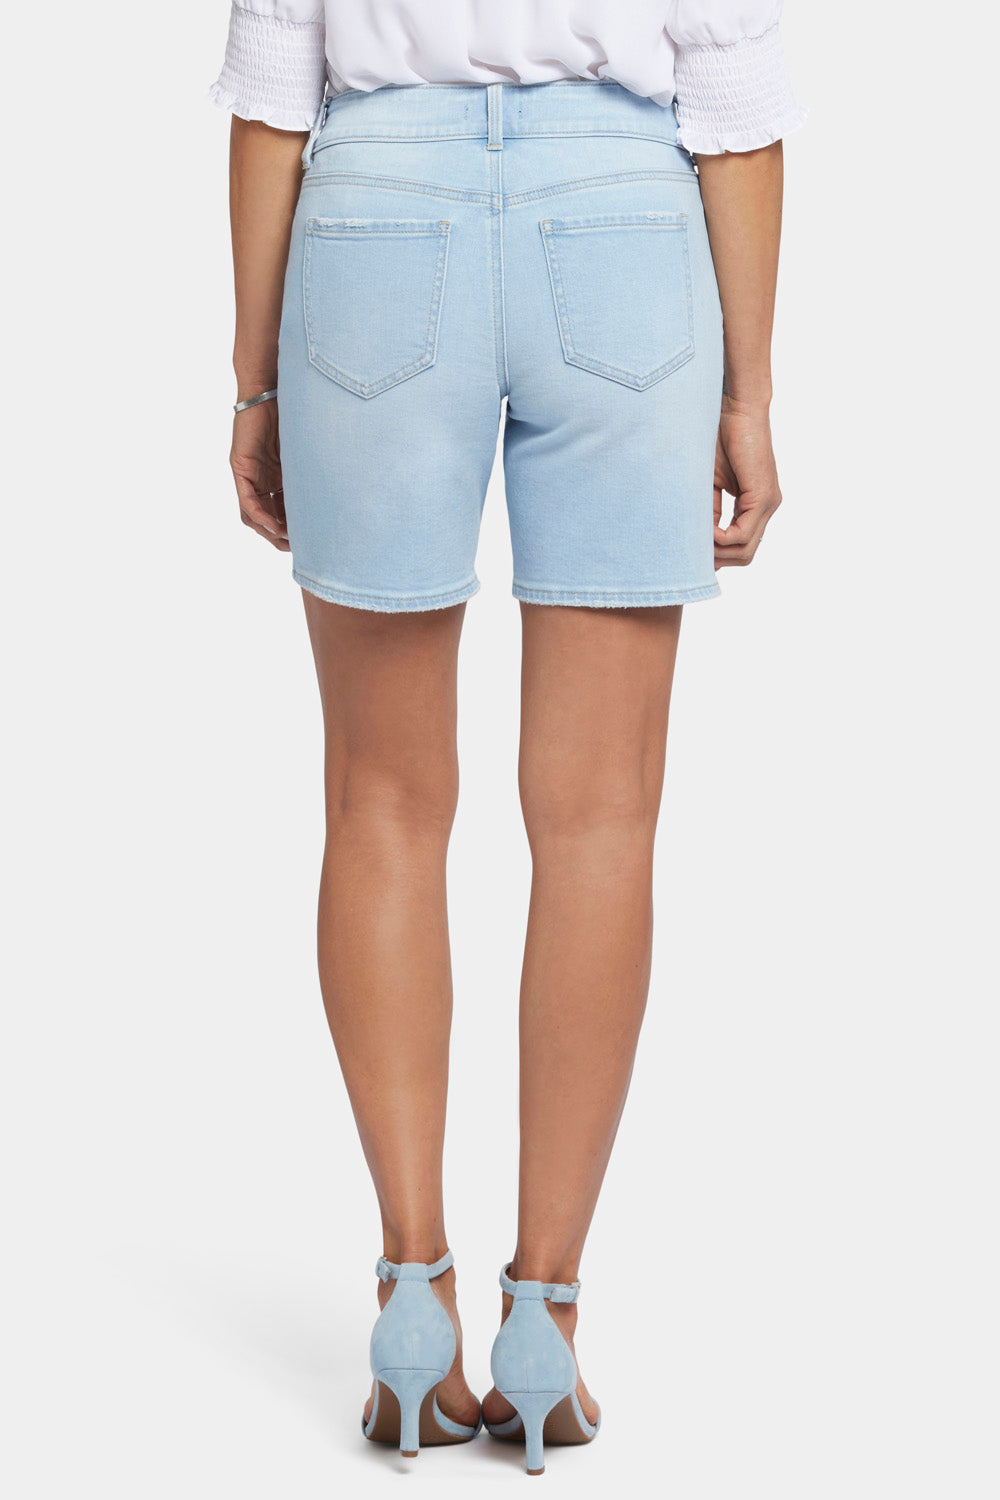 NYDJ Frankie Relaxed Denim Shorts With Wide Waistband And Square Pockets - Estrella